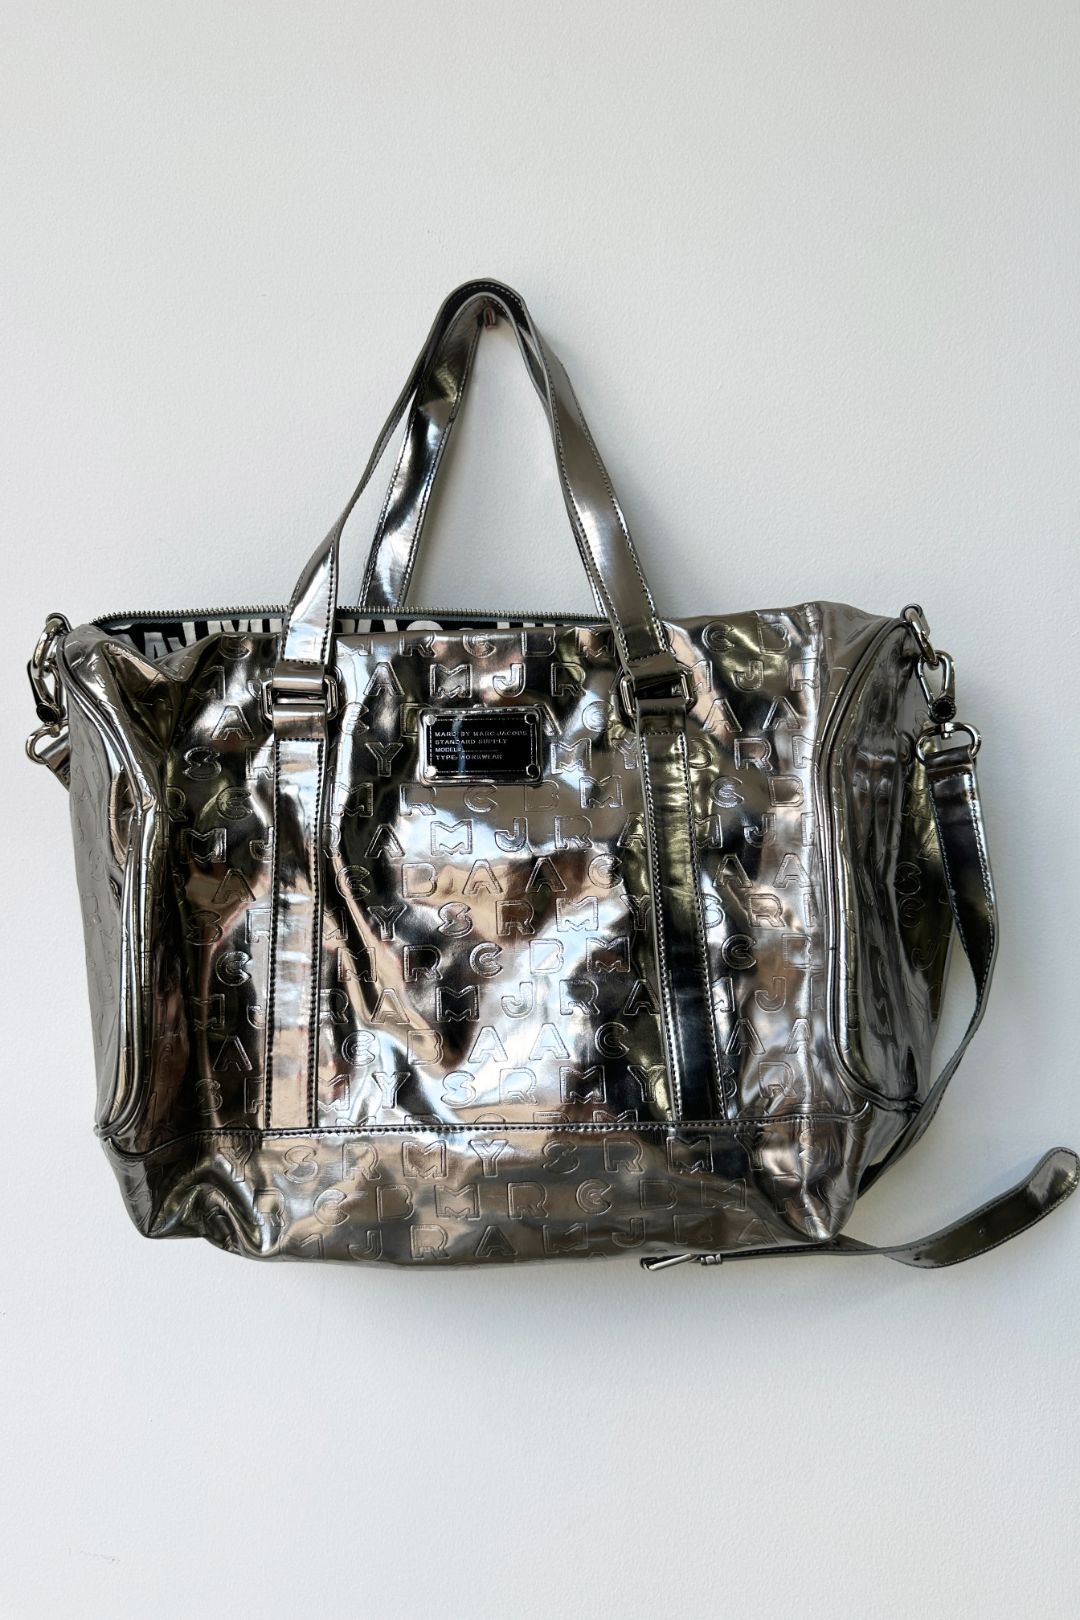 Marc by Marc Jacobs Metallic Silver Duffle Bag